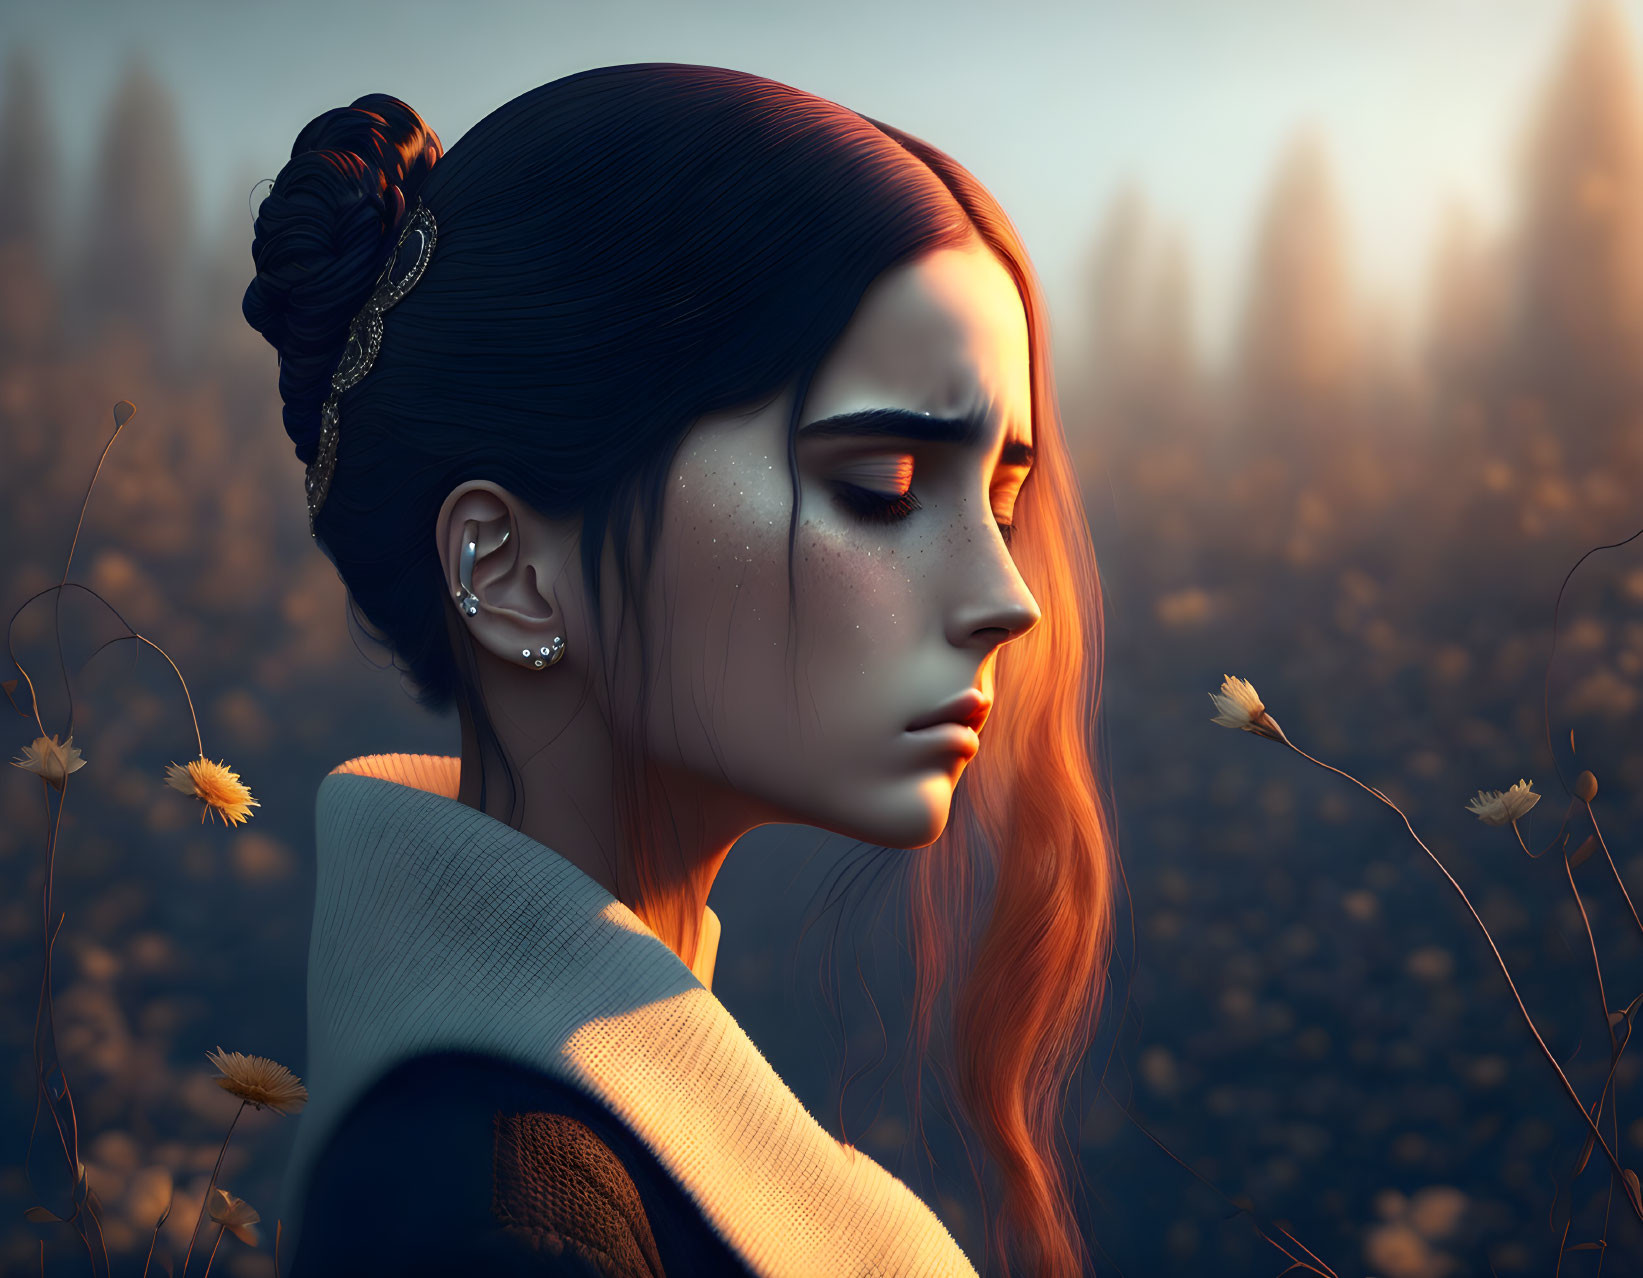 Contemplative woman with glittering freckles in twilight field with dandelions